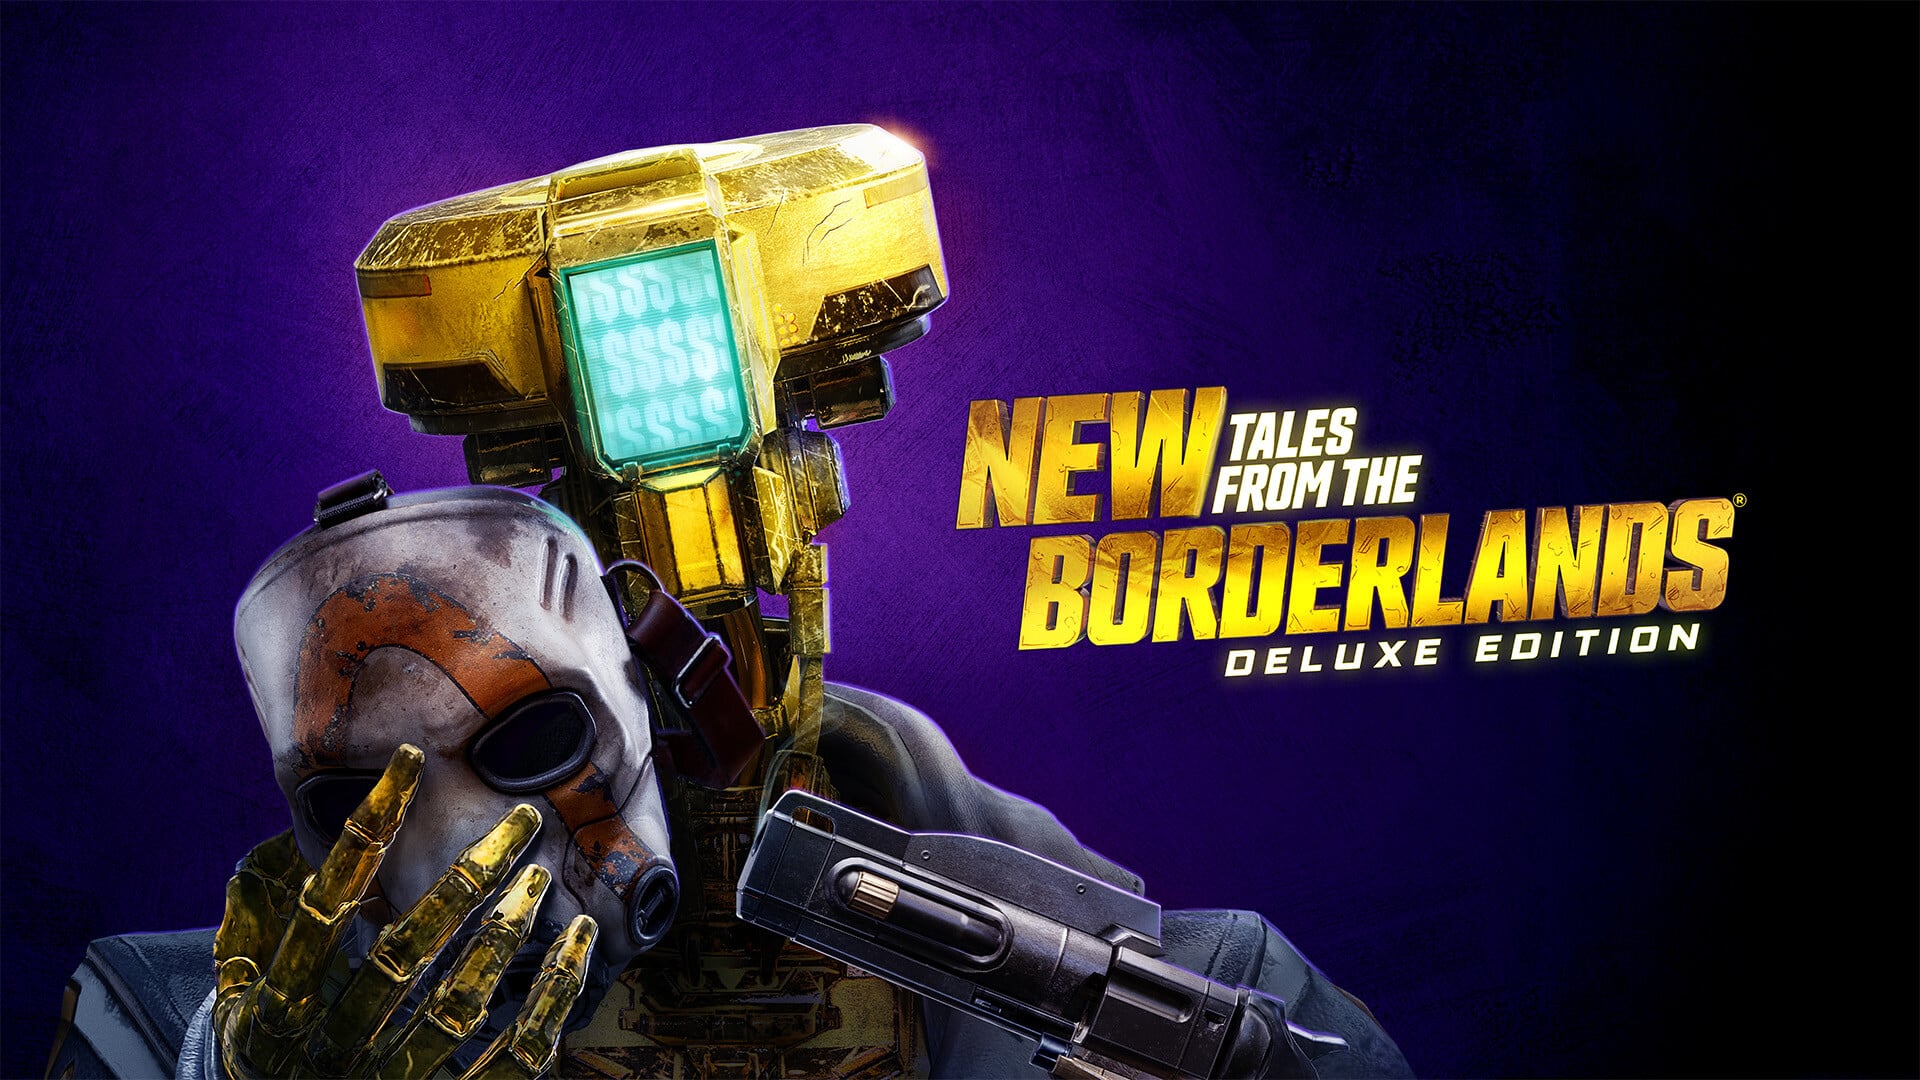 New Tales from the Borderlands Deluxe Edition Cover